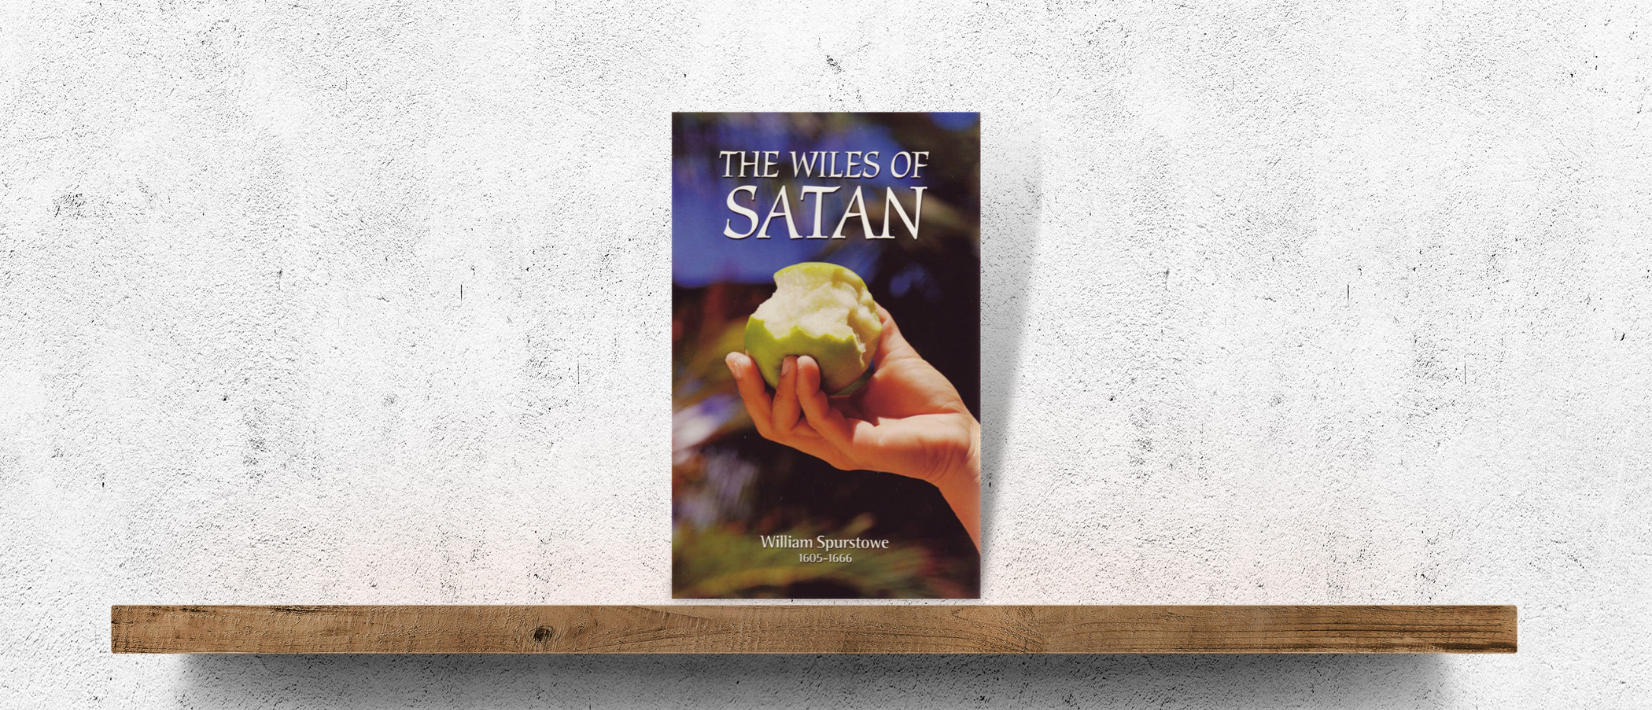 Image of the cover of the book 'The Wiles of Satan' on a bookshelf.